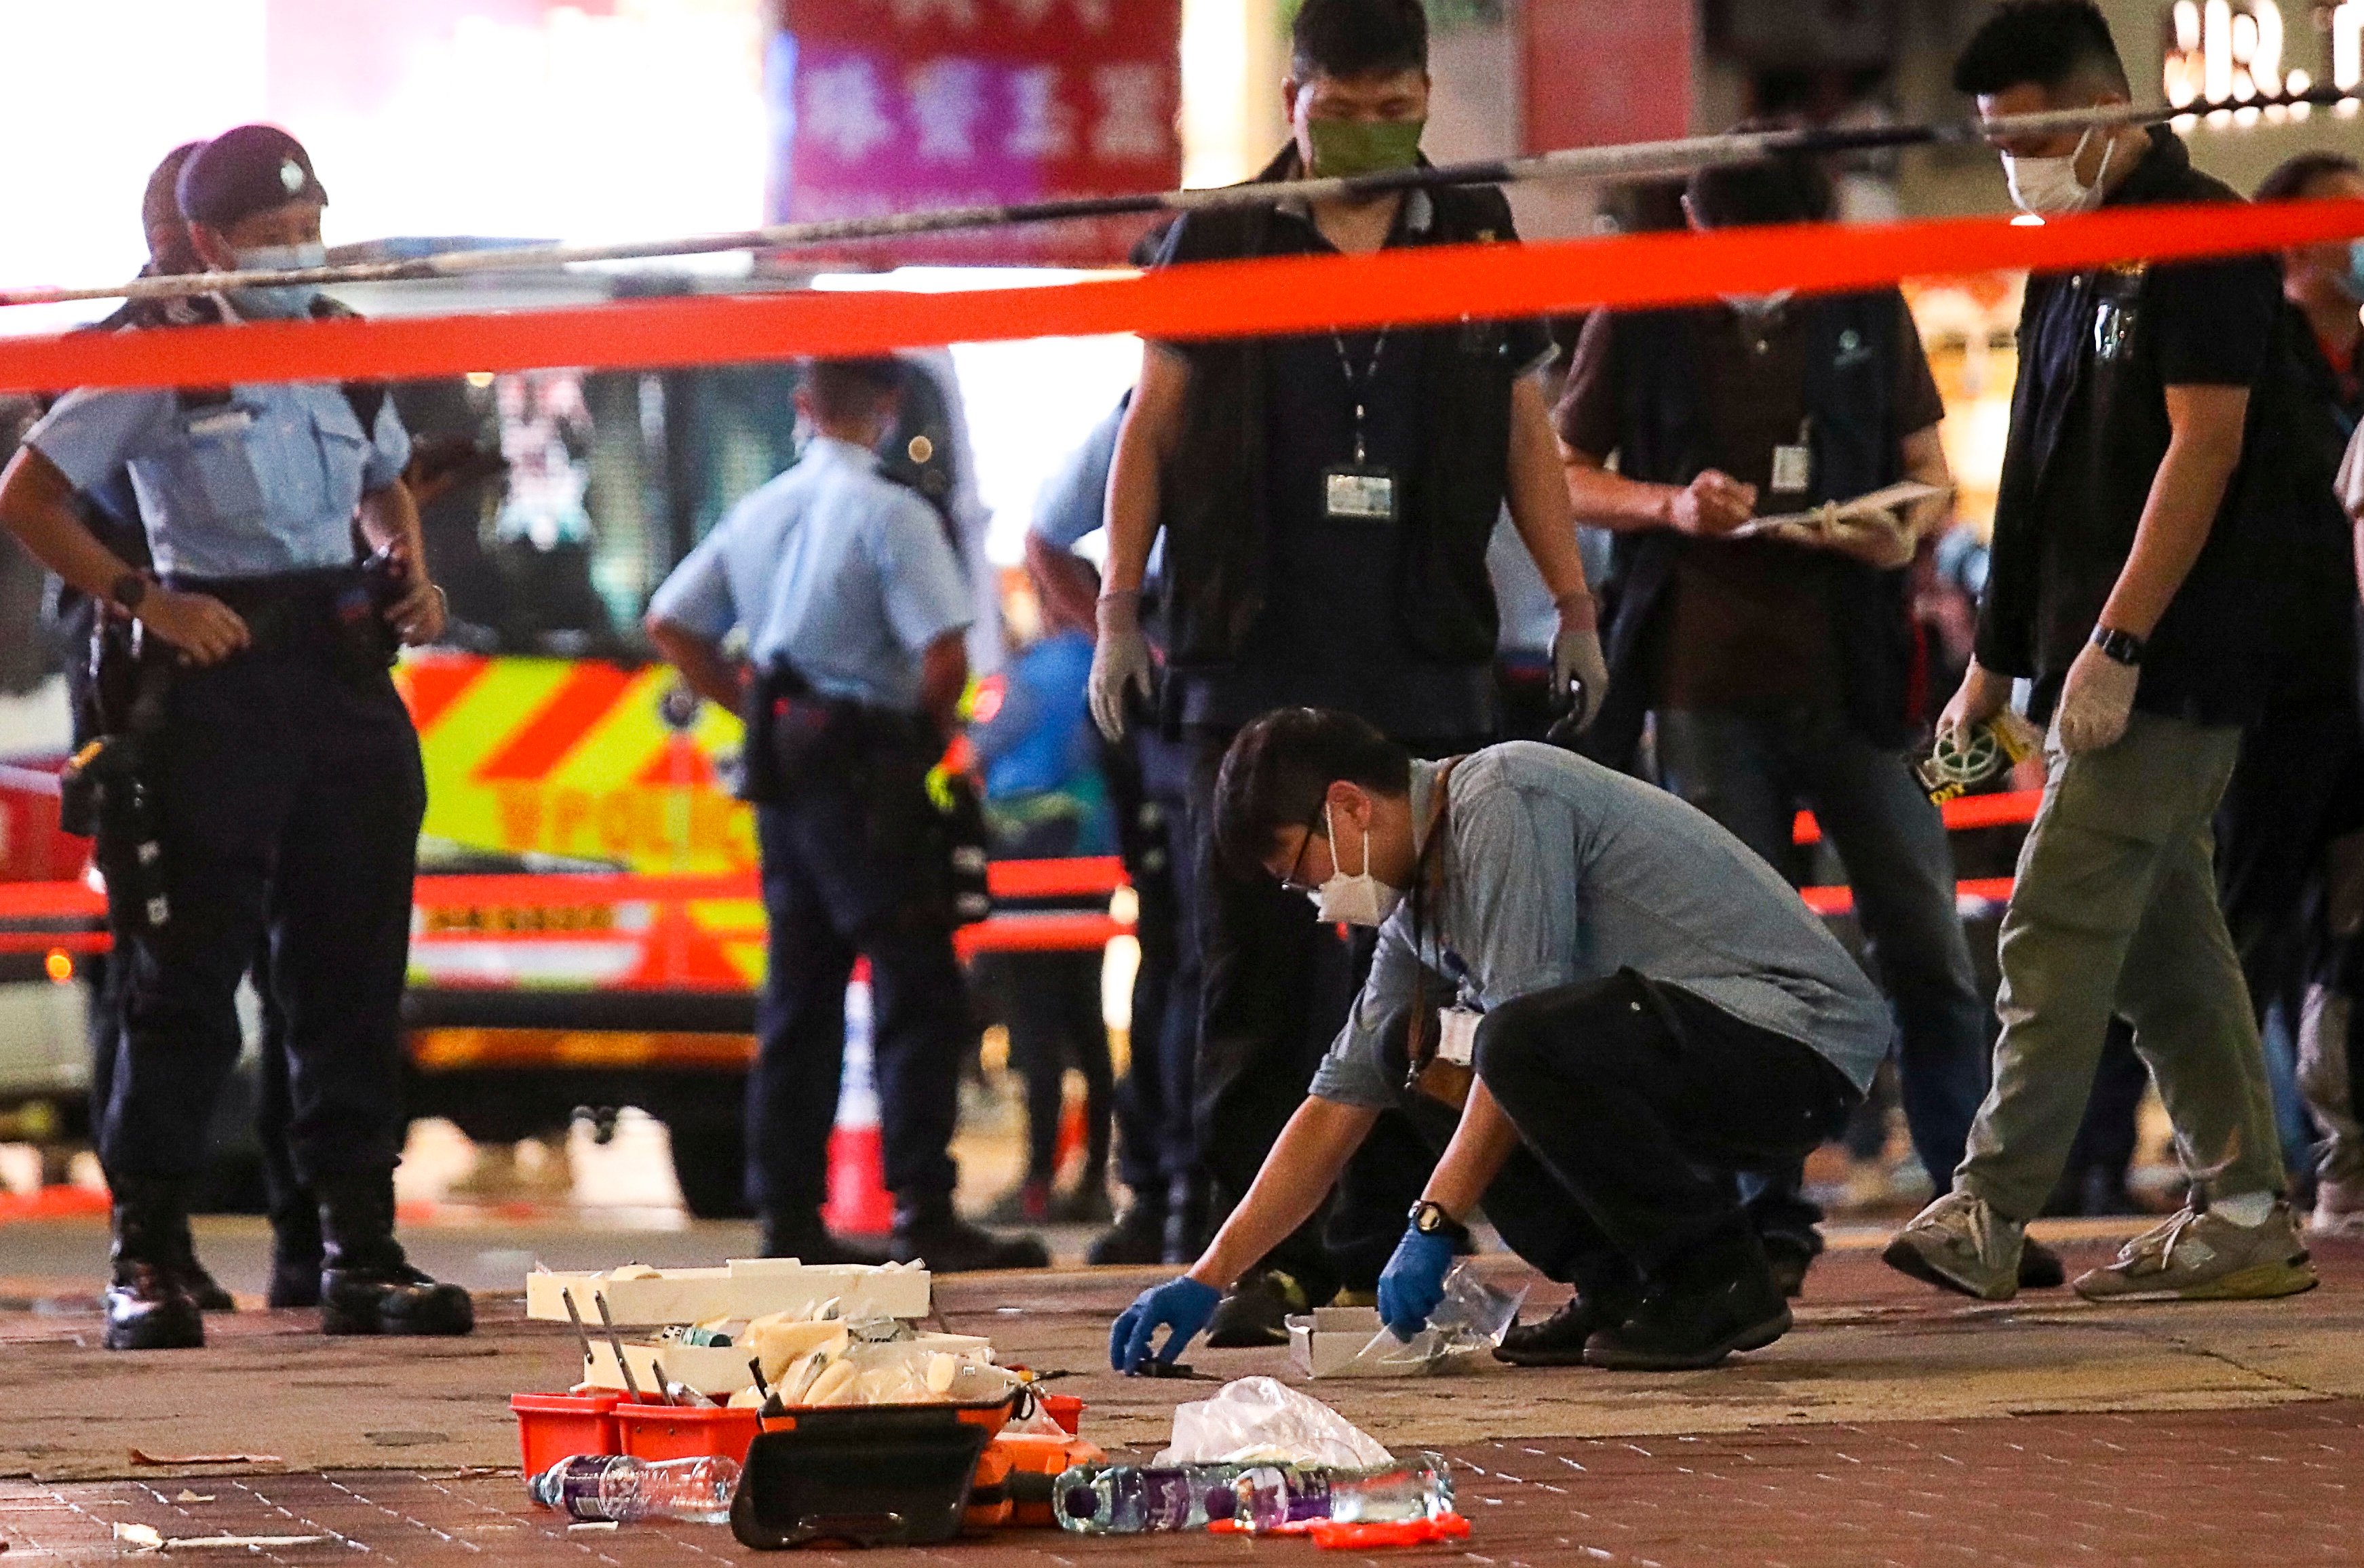 The crime scene outside the Sogo department store in Causeway Bay on July 1, 2021. Photo: Xiaomei Chen